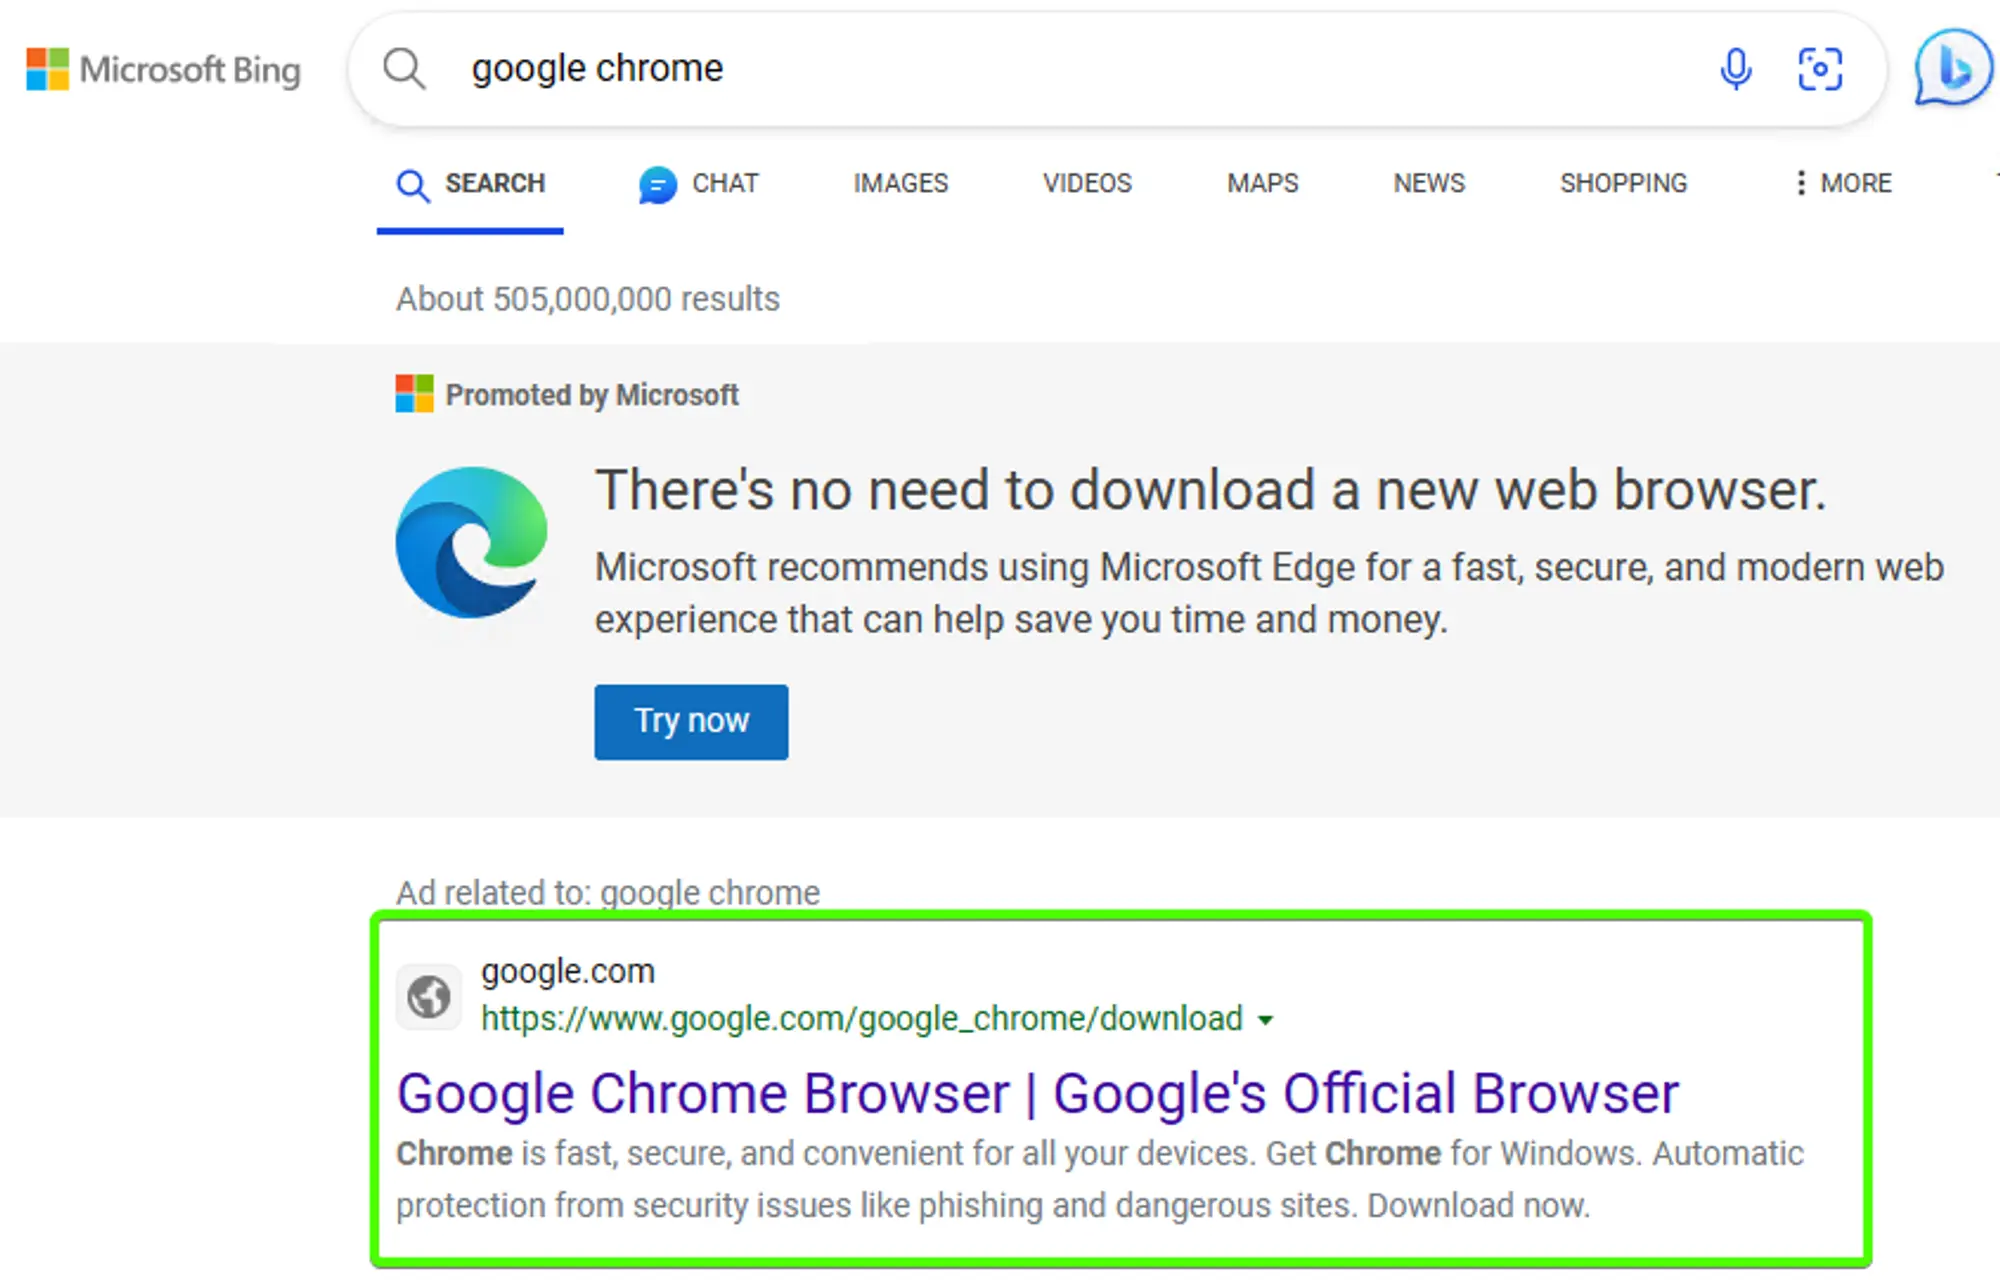 A web search for “google chrome” using the Bing search engine with a box around the first result, that being the “Google Chrome Browser | Google’s Official Browser”